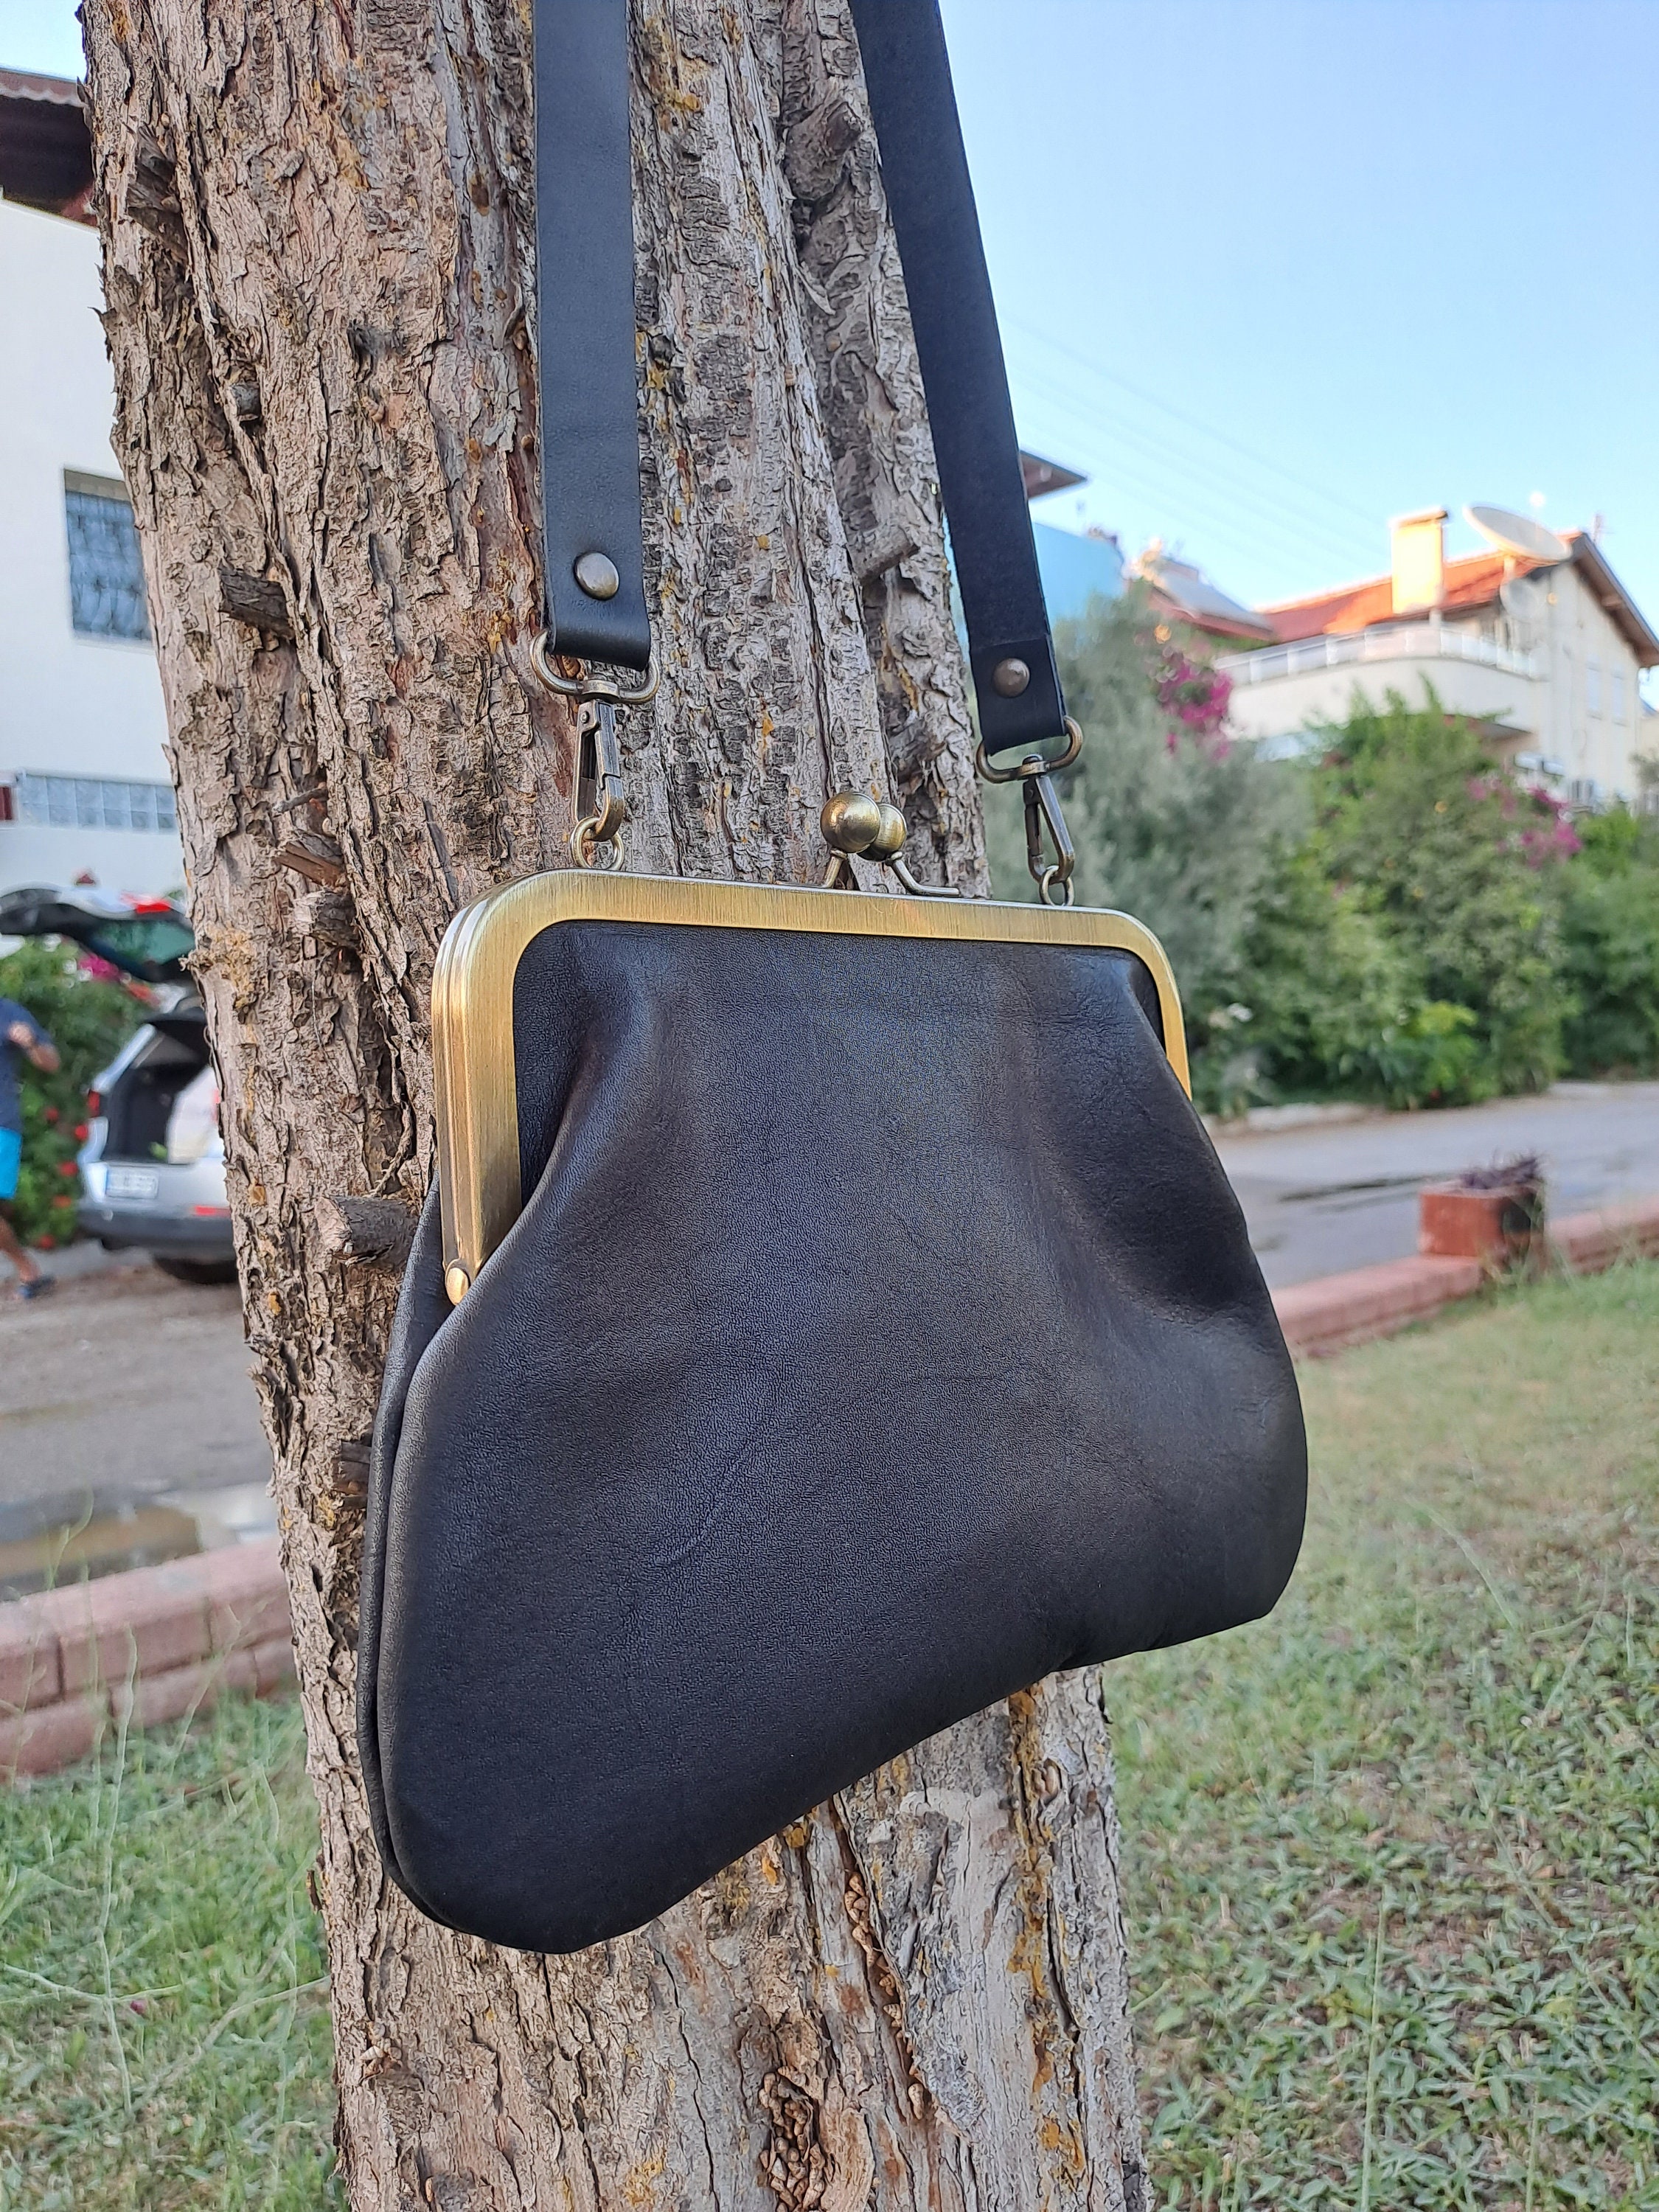 Black Leather Kiss Lock Bag, Clutch, Vintage Shoulder and Crossbody Bag for  Women, Evening Bag and for Daily Use, Handmade Kiss Lock